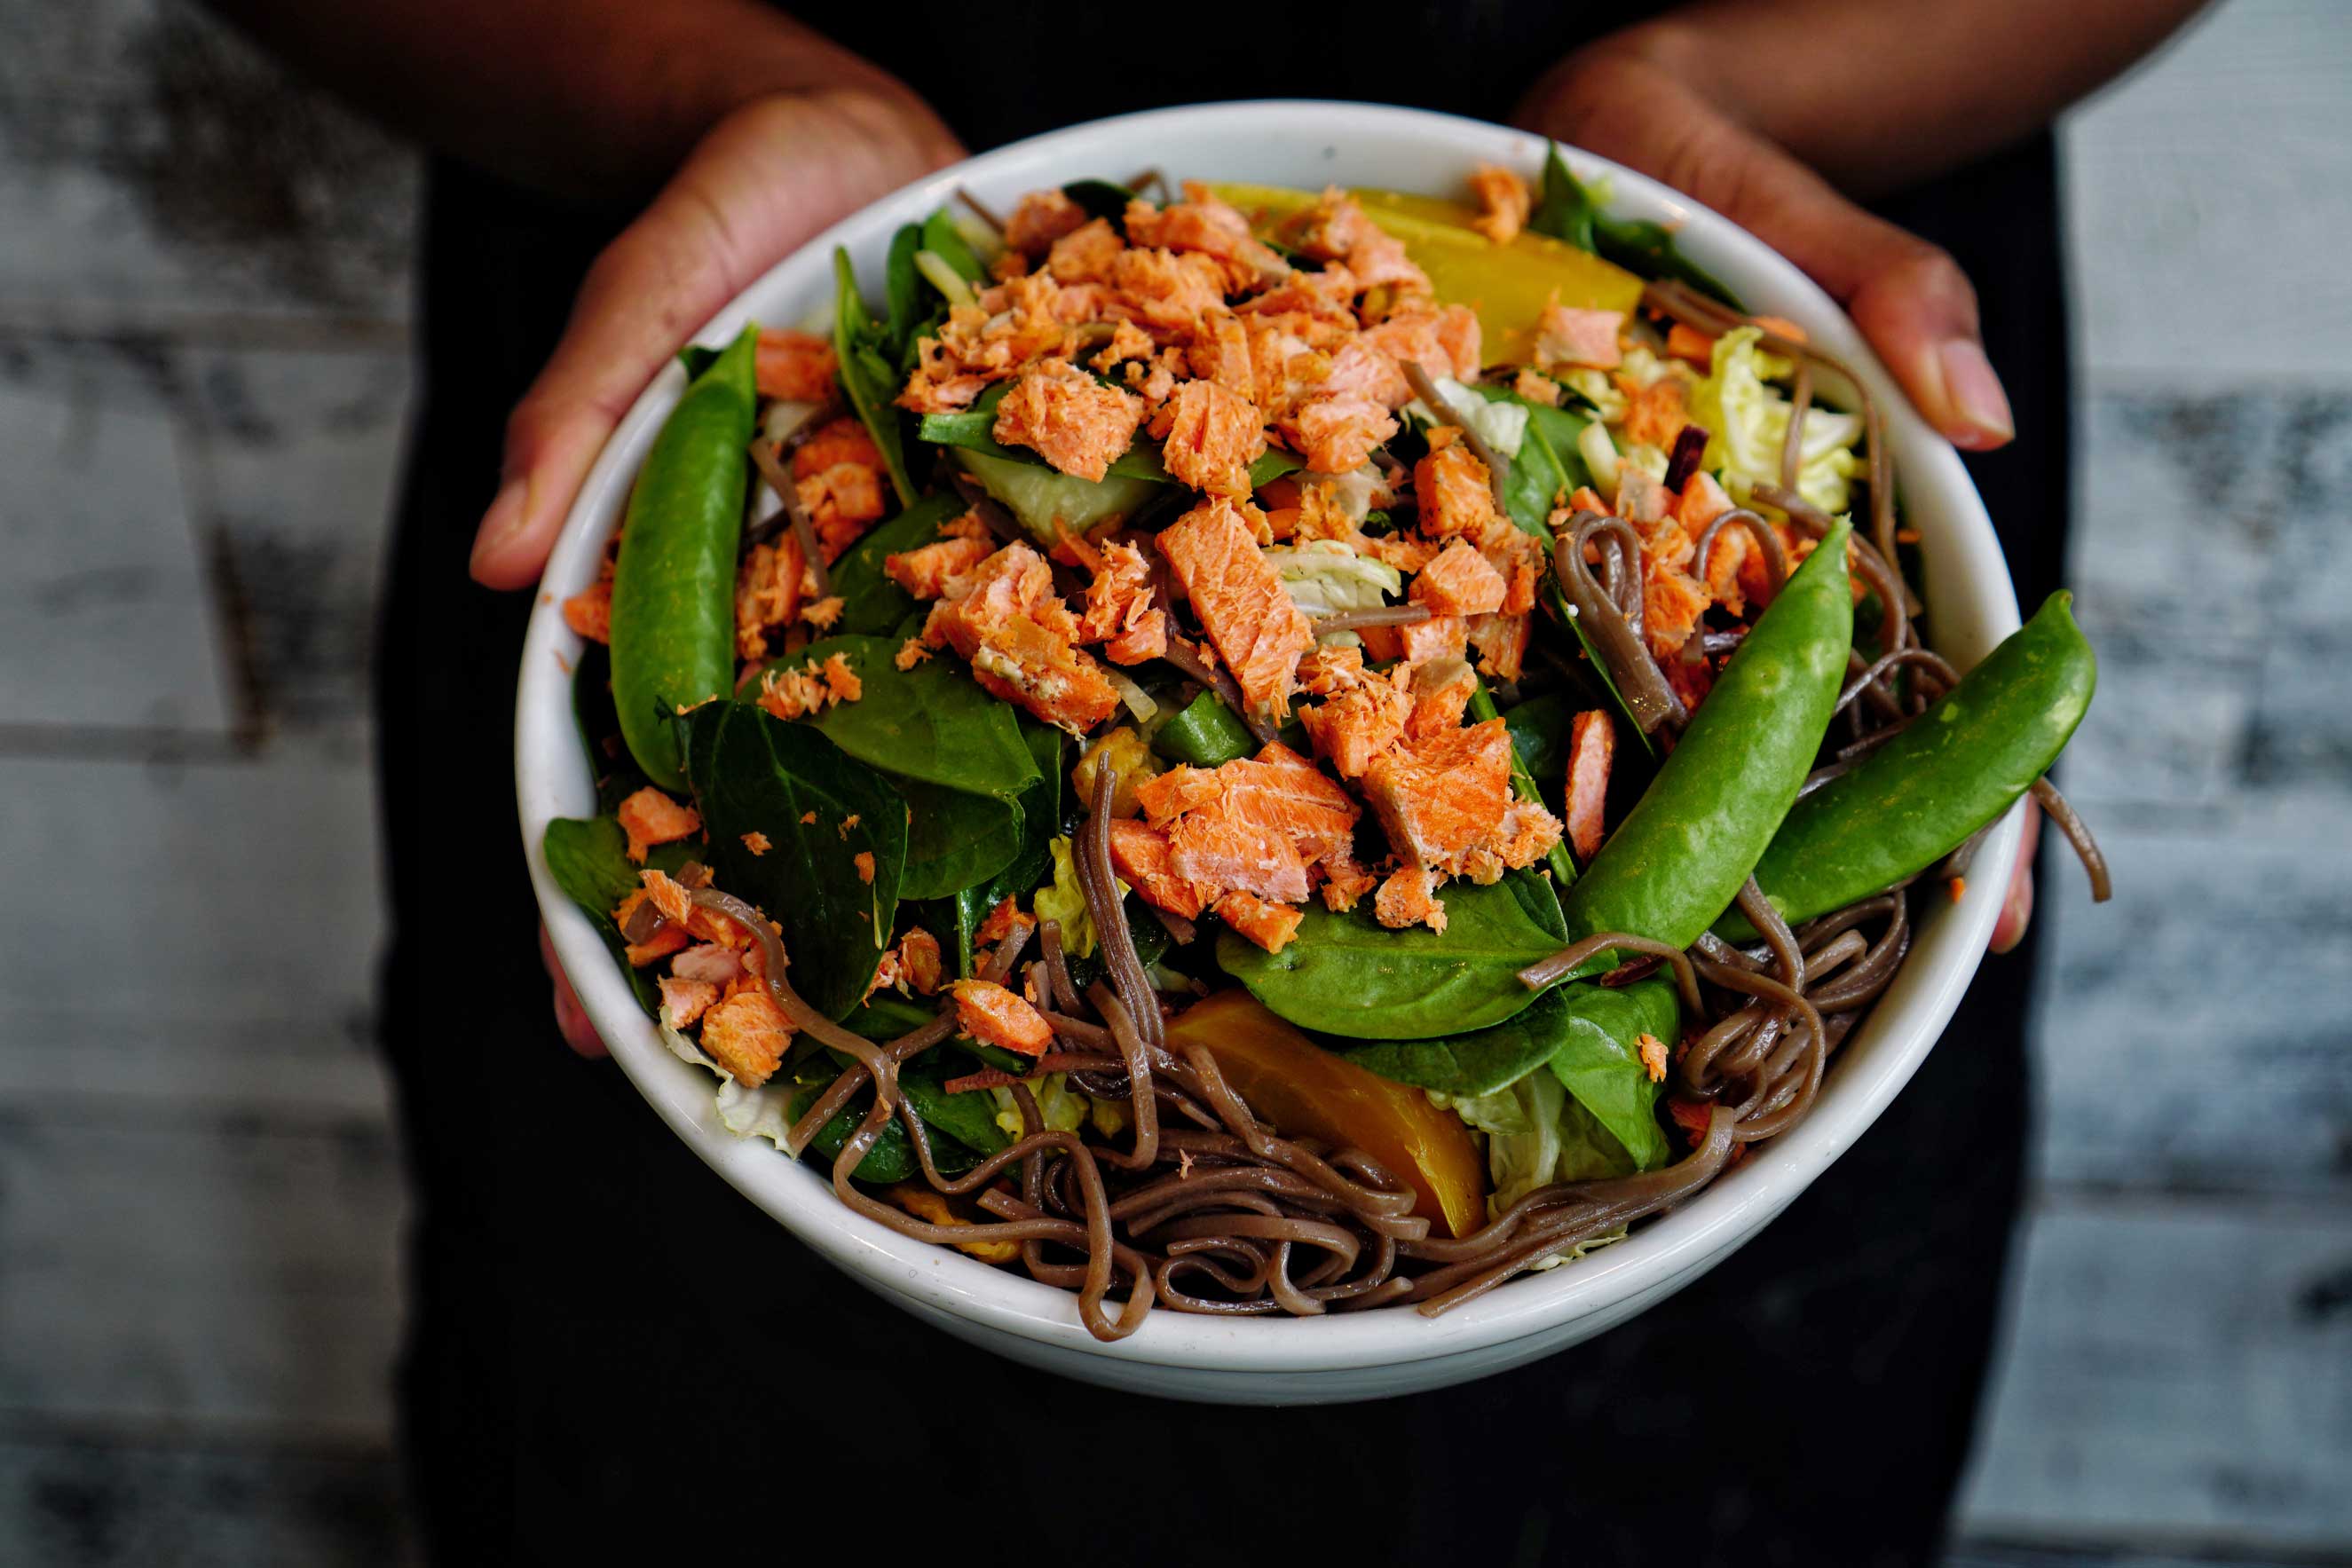 Two hands holding a white bowl of brown noodles, spinach leaves and salmon.